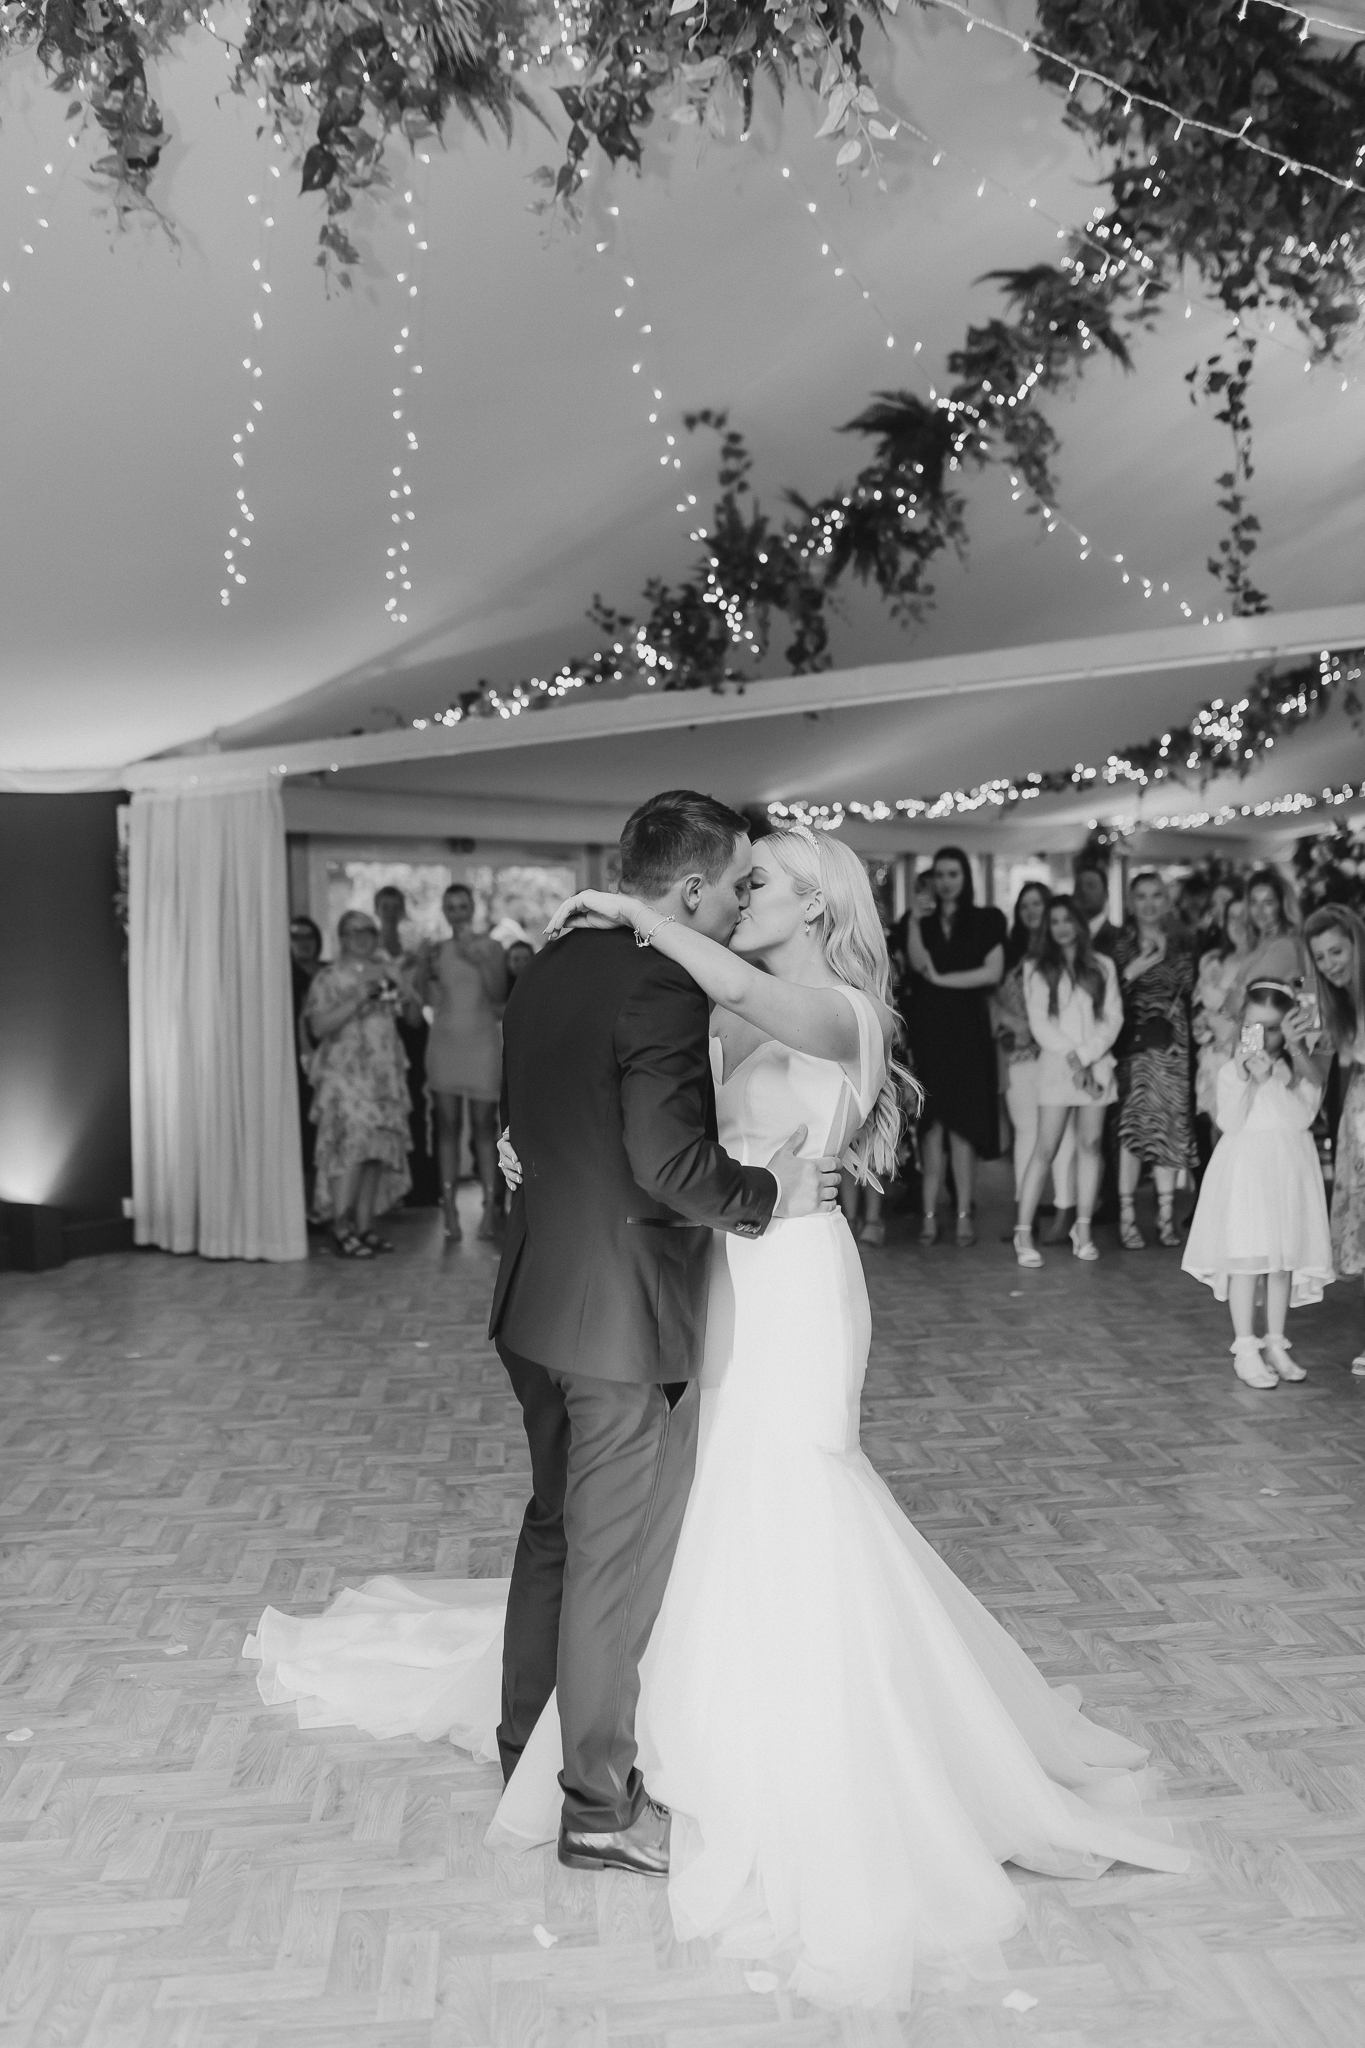 Kelsey and Spencer sharing a kiss during their first dance at Cheshire wedding venue Combermere Abbey